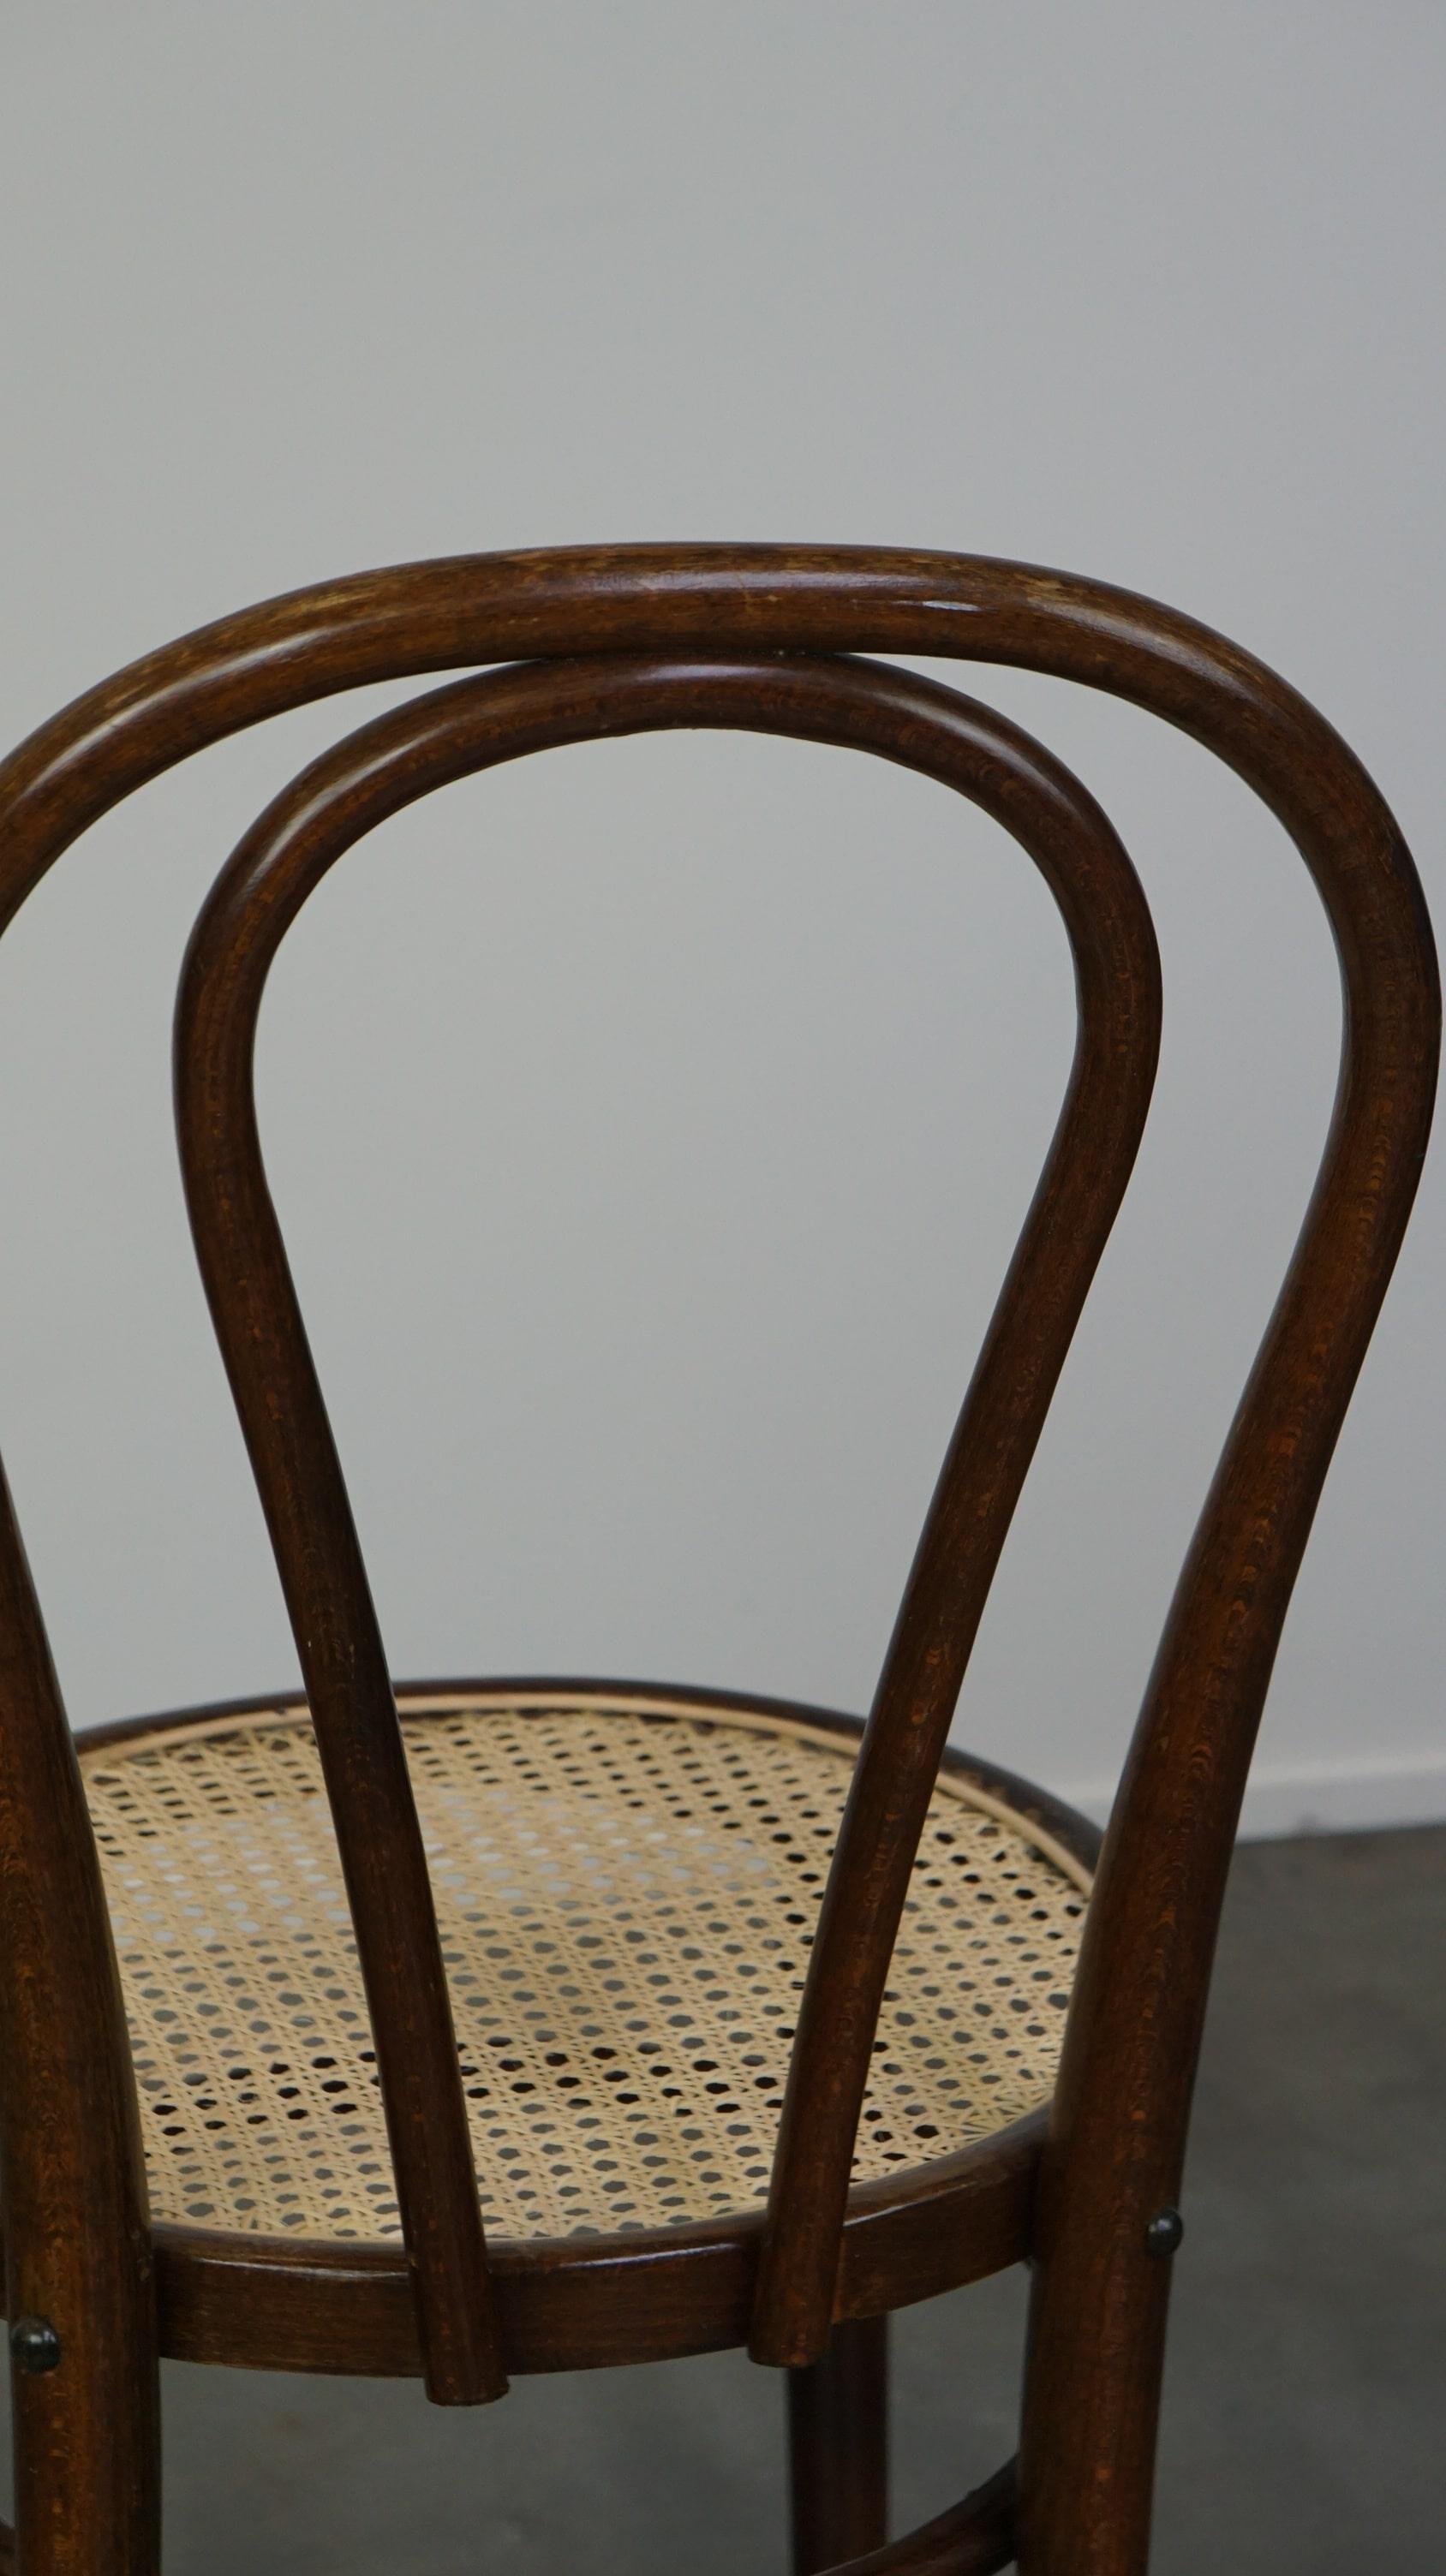 Original antique bentwood Thonet chair model no. 18 with a new woven seat For Sale 4